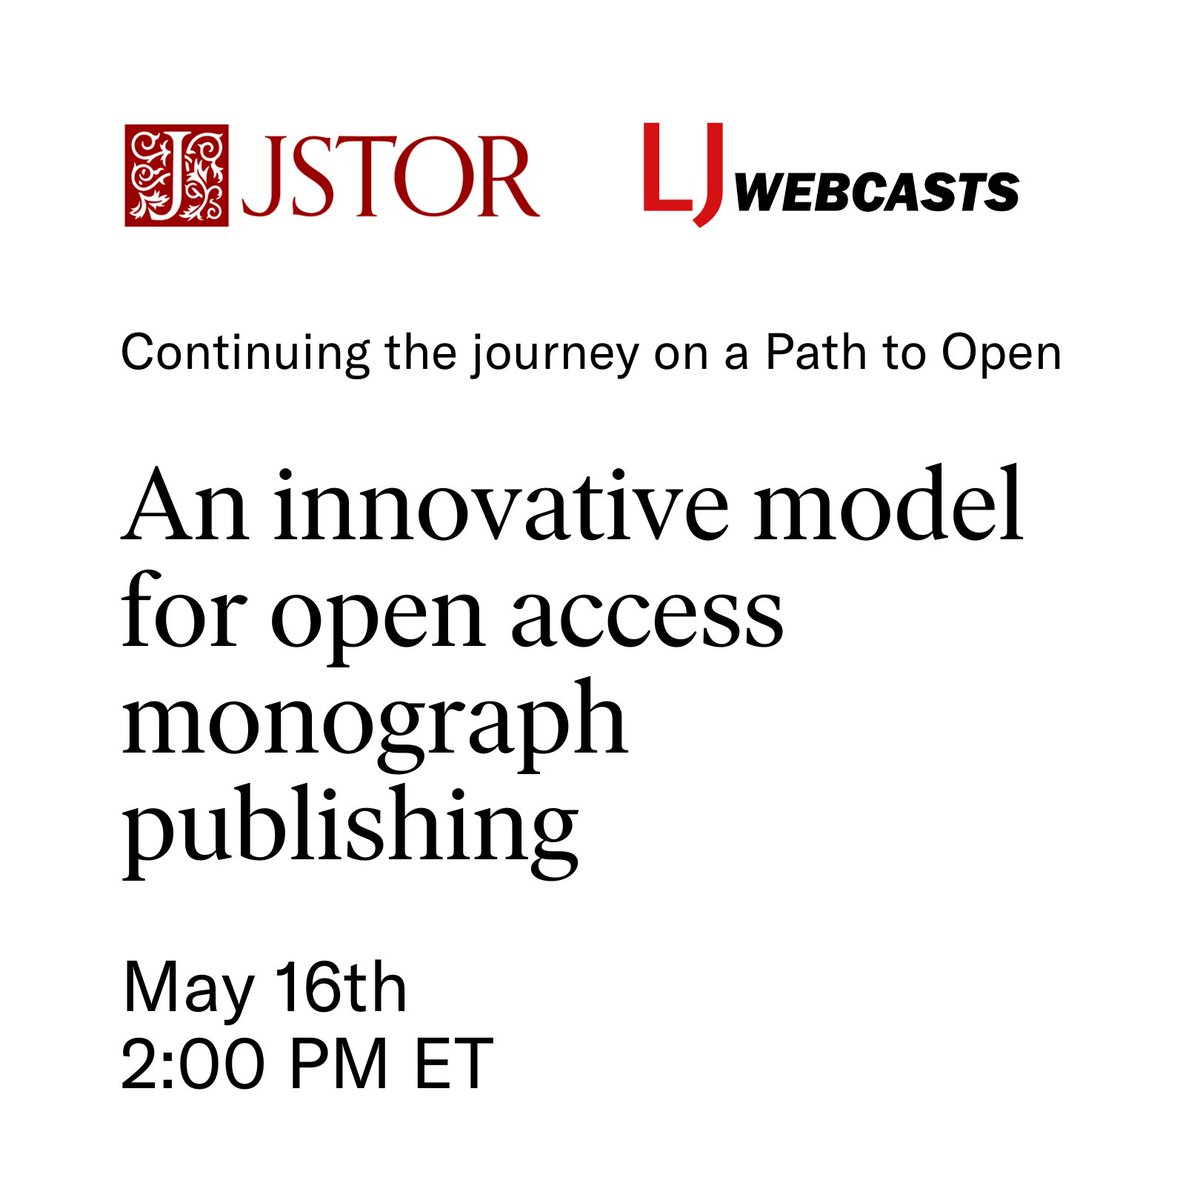 Exciting news! Join us, @LibraryJournal, and @ACLS1919 on May 16 from 2:00 PM to 3:00 PM ET for 'Continuing the Journey on a Path to Open: An Innovative Model for Open Access Monograph Publishing.' 🌱 Explore sustainable #OpenAccess models. Register: bit.ly/3W0ukhN